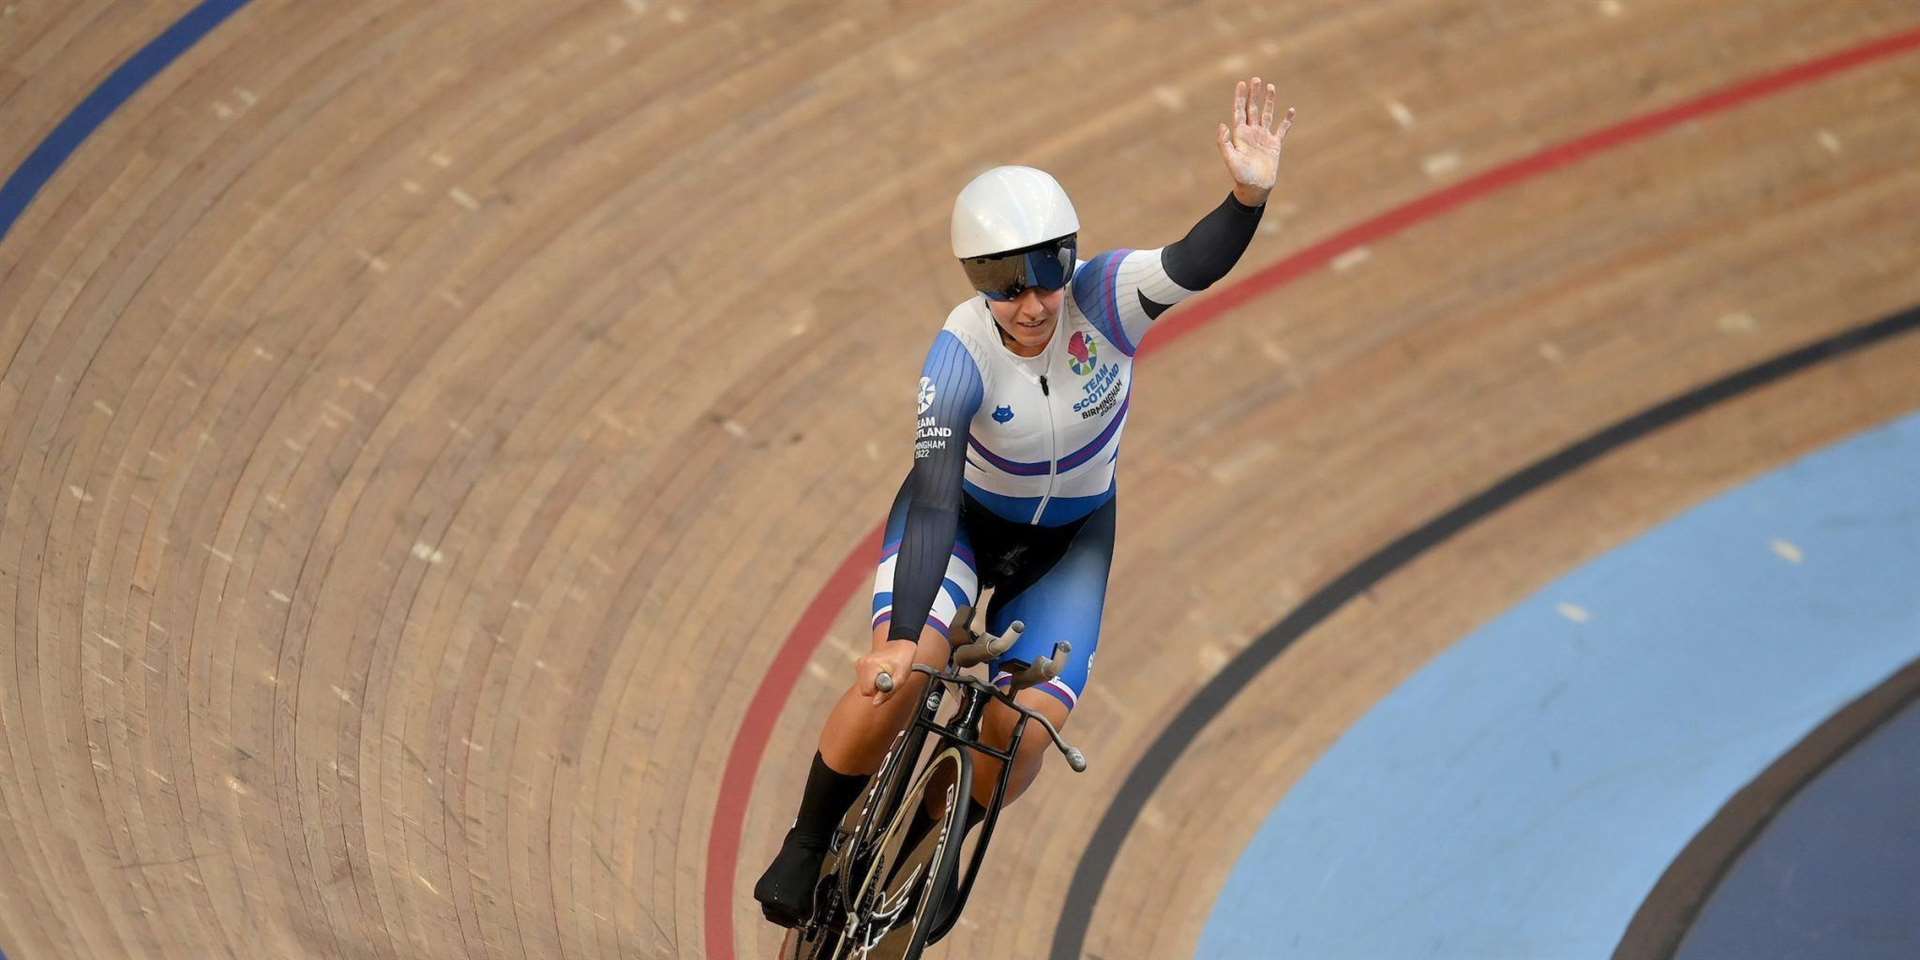 Neah Evans used her track experience in the sprint final of the road race to claim silver.